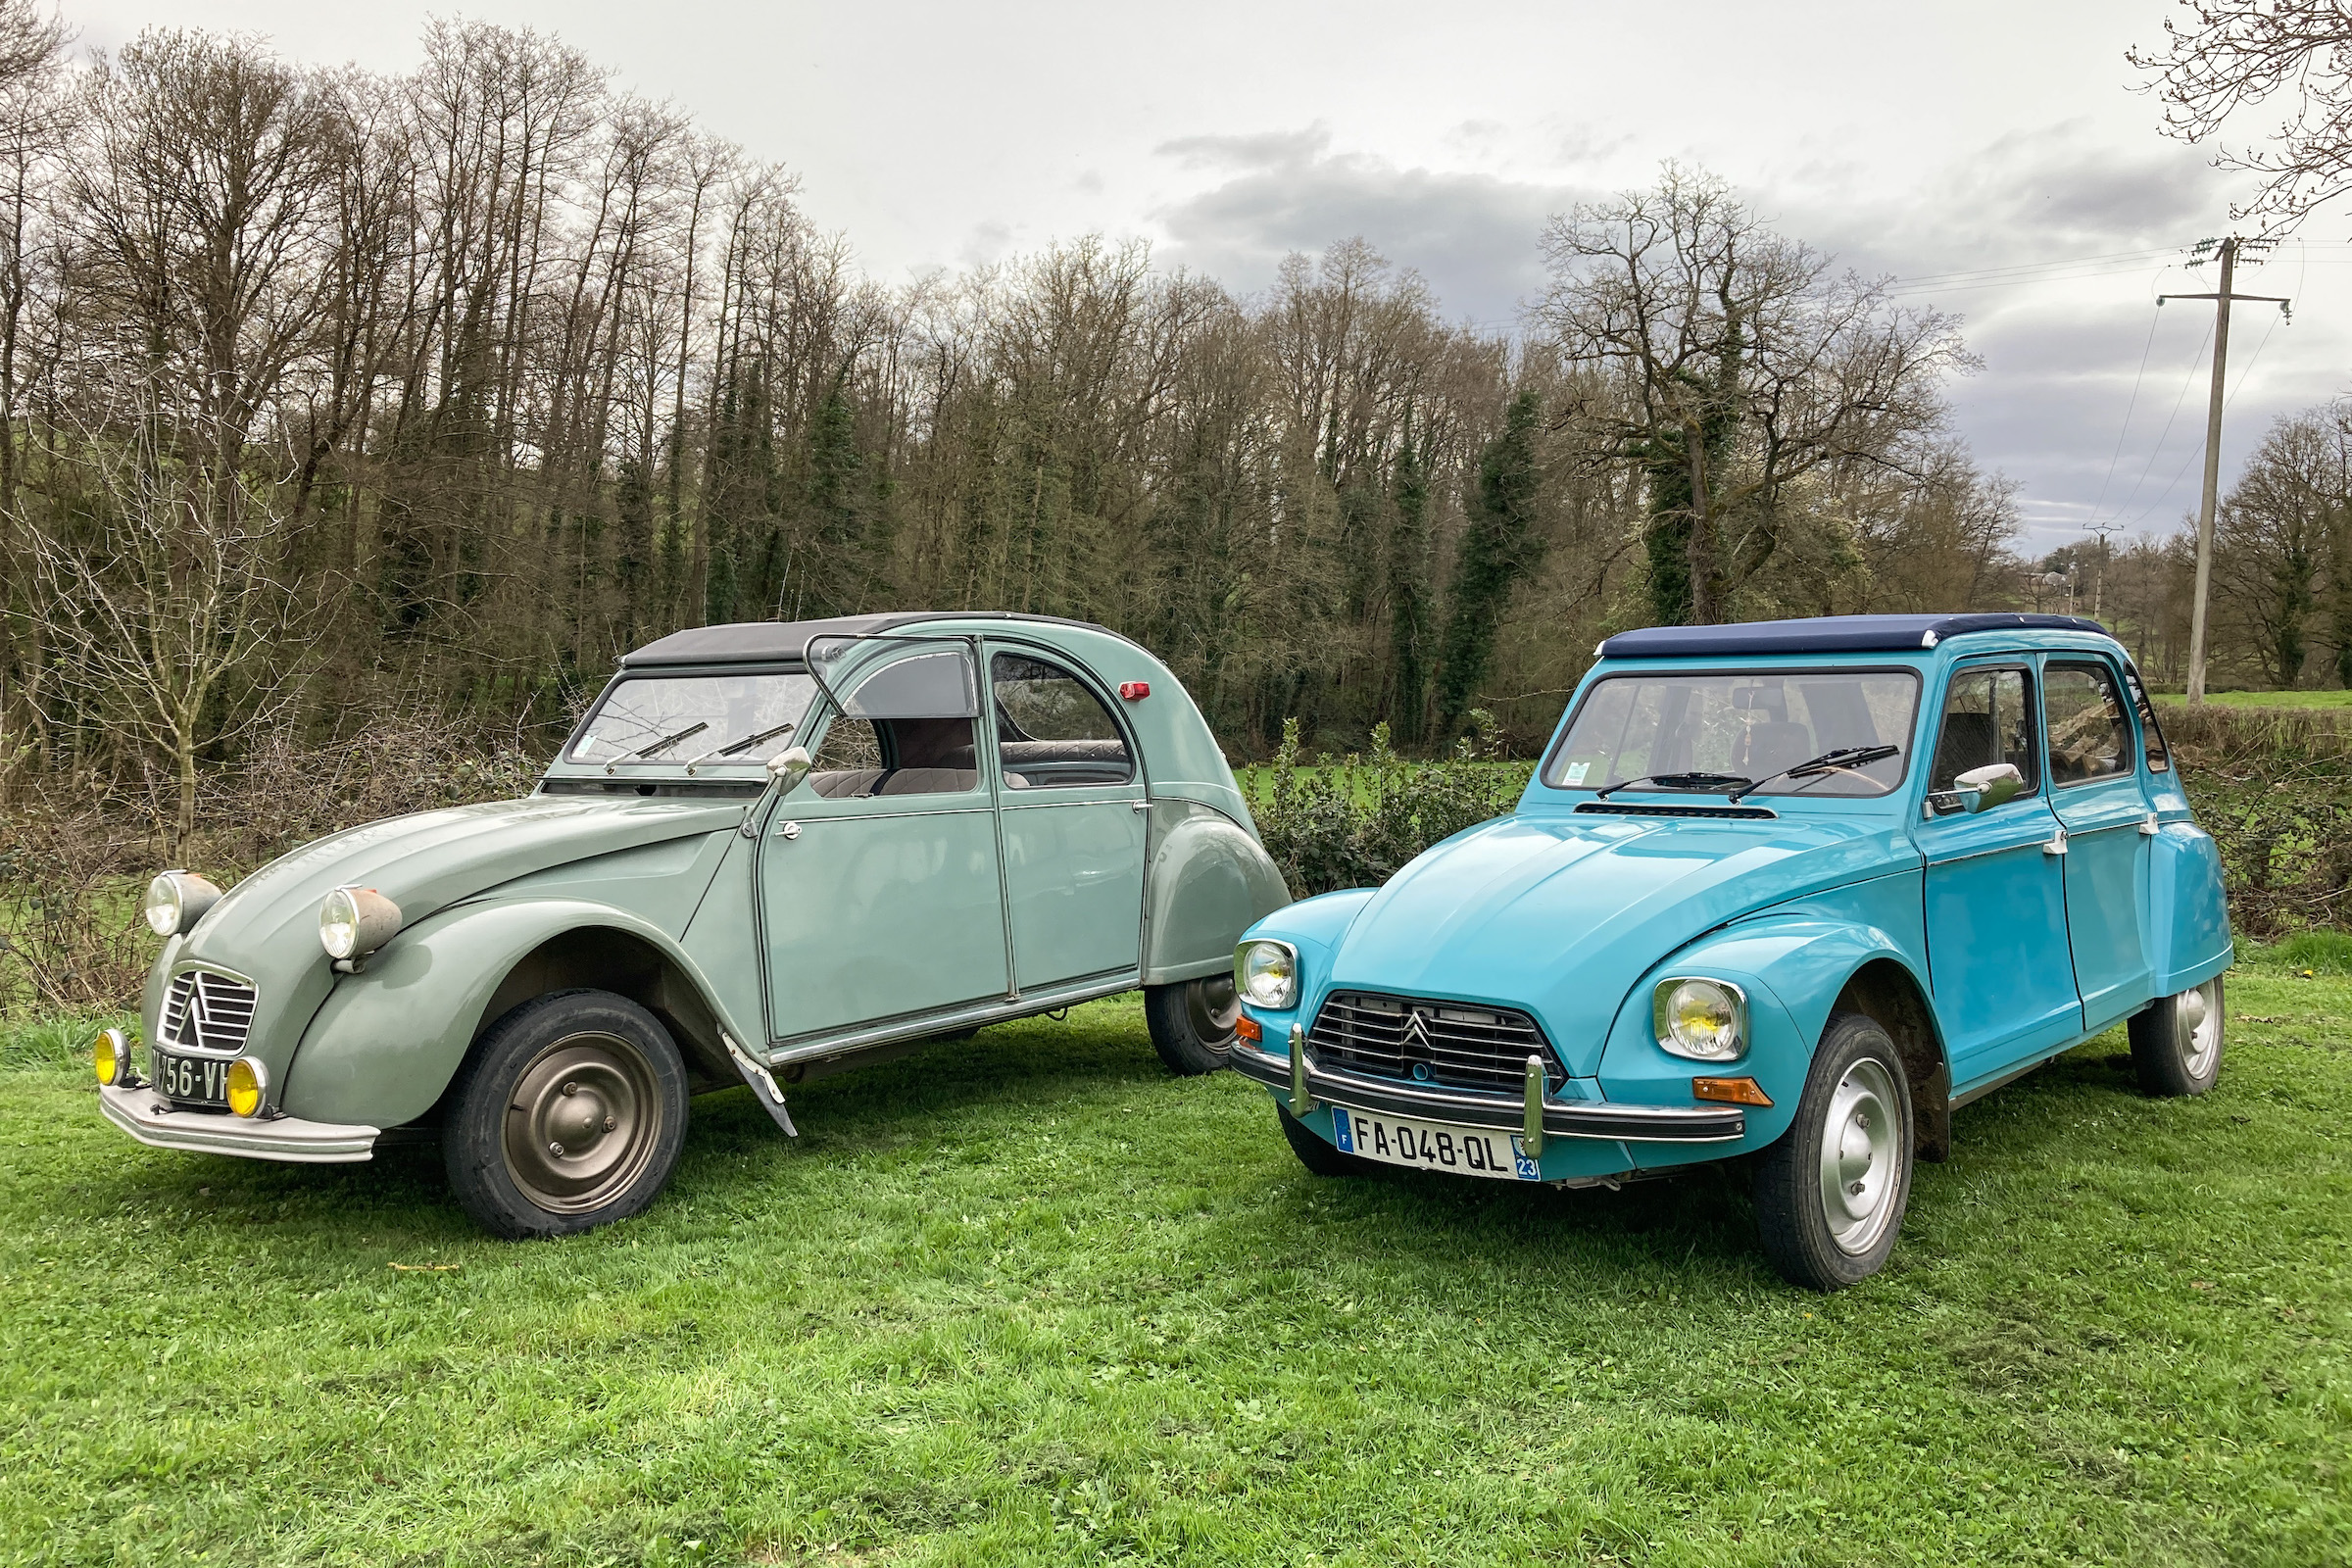 French bred: 2CV, Dyane, and a day in the French countryside